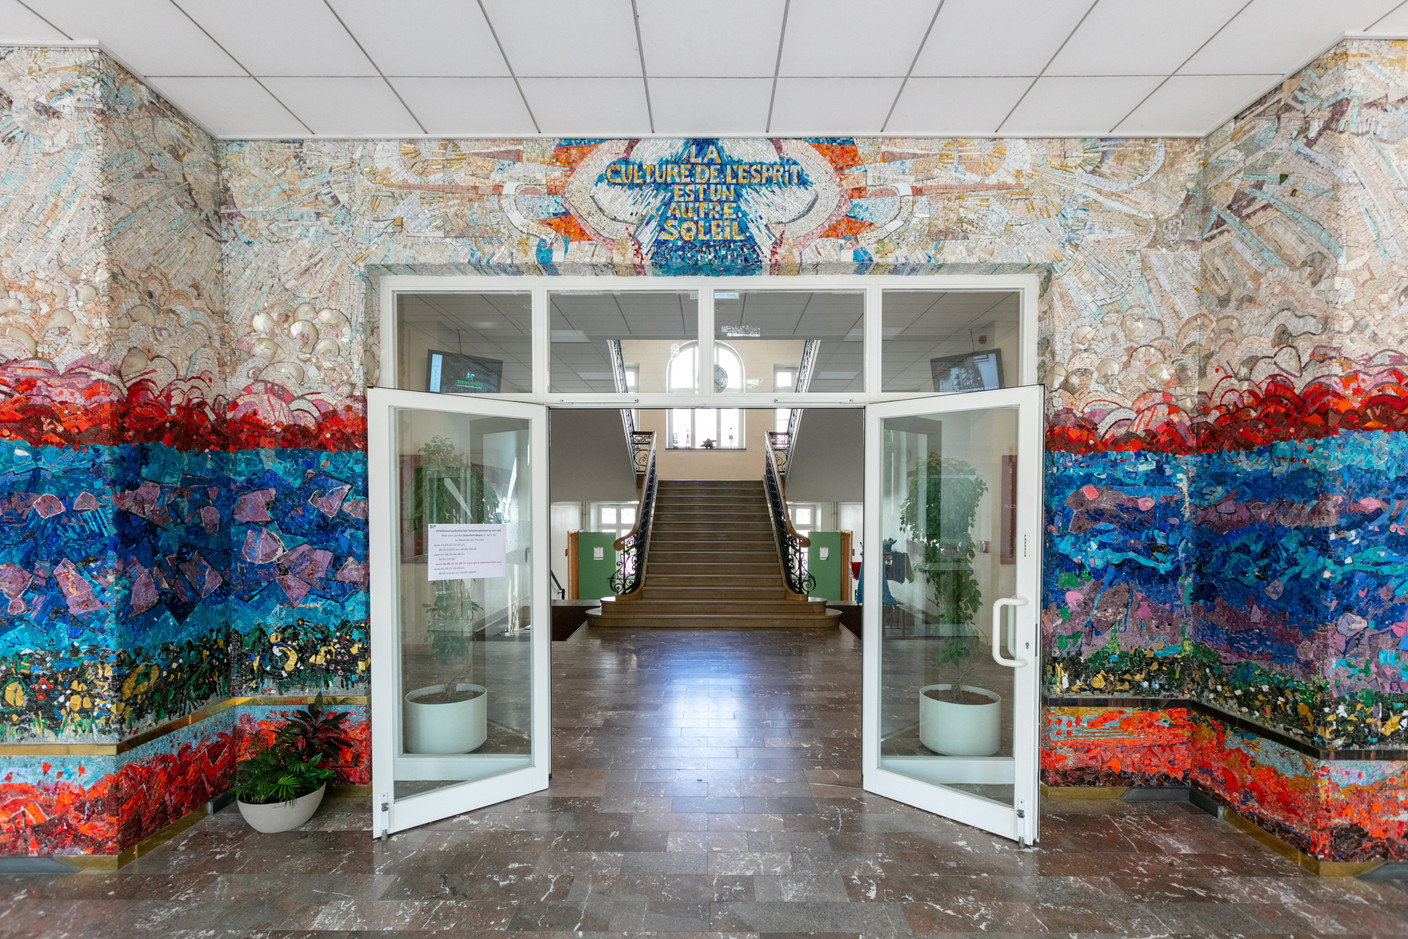 A mosaic by Foni Thissen greets people at the main entrance Romain Gamba / Maison Moderne